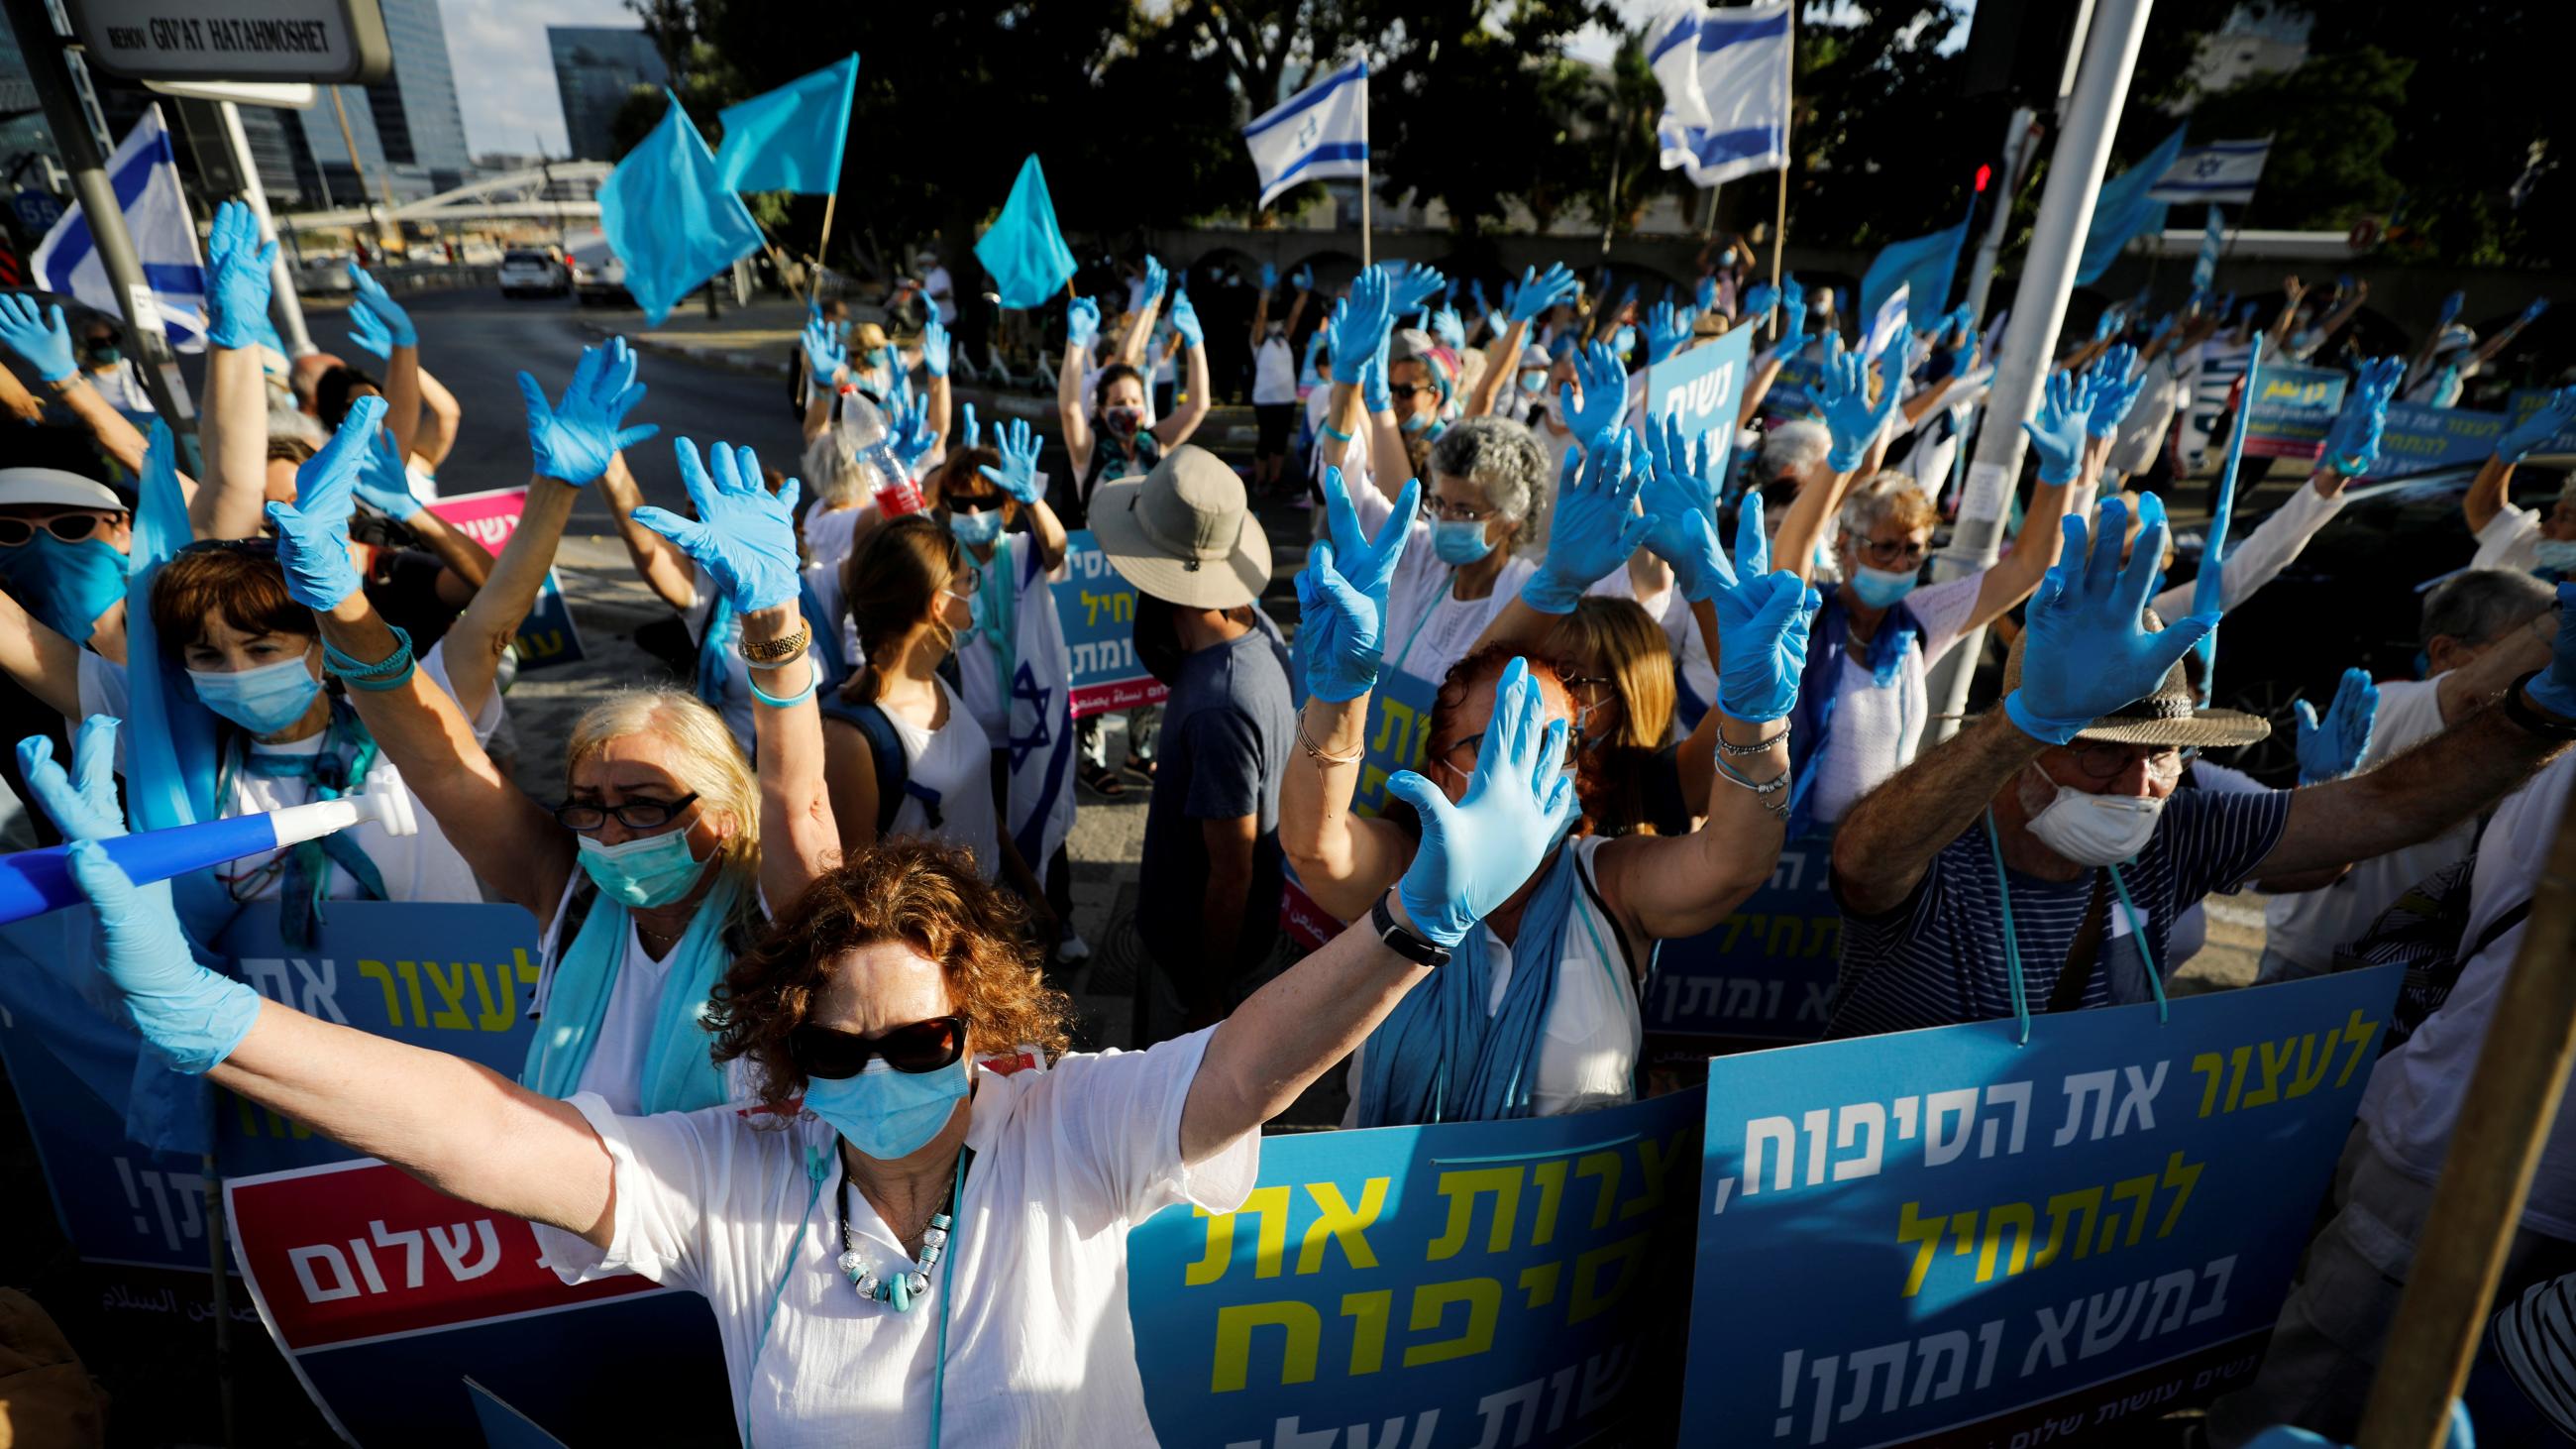 Women take part in a protest, organized by the "Women Wage Peace" grassroots movement, against Israel's planned annexation of part of the Israeli-occupied West Bank, outside government offices in Tel Aviv, Israel, on June 18, 2020